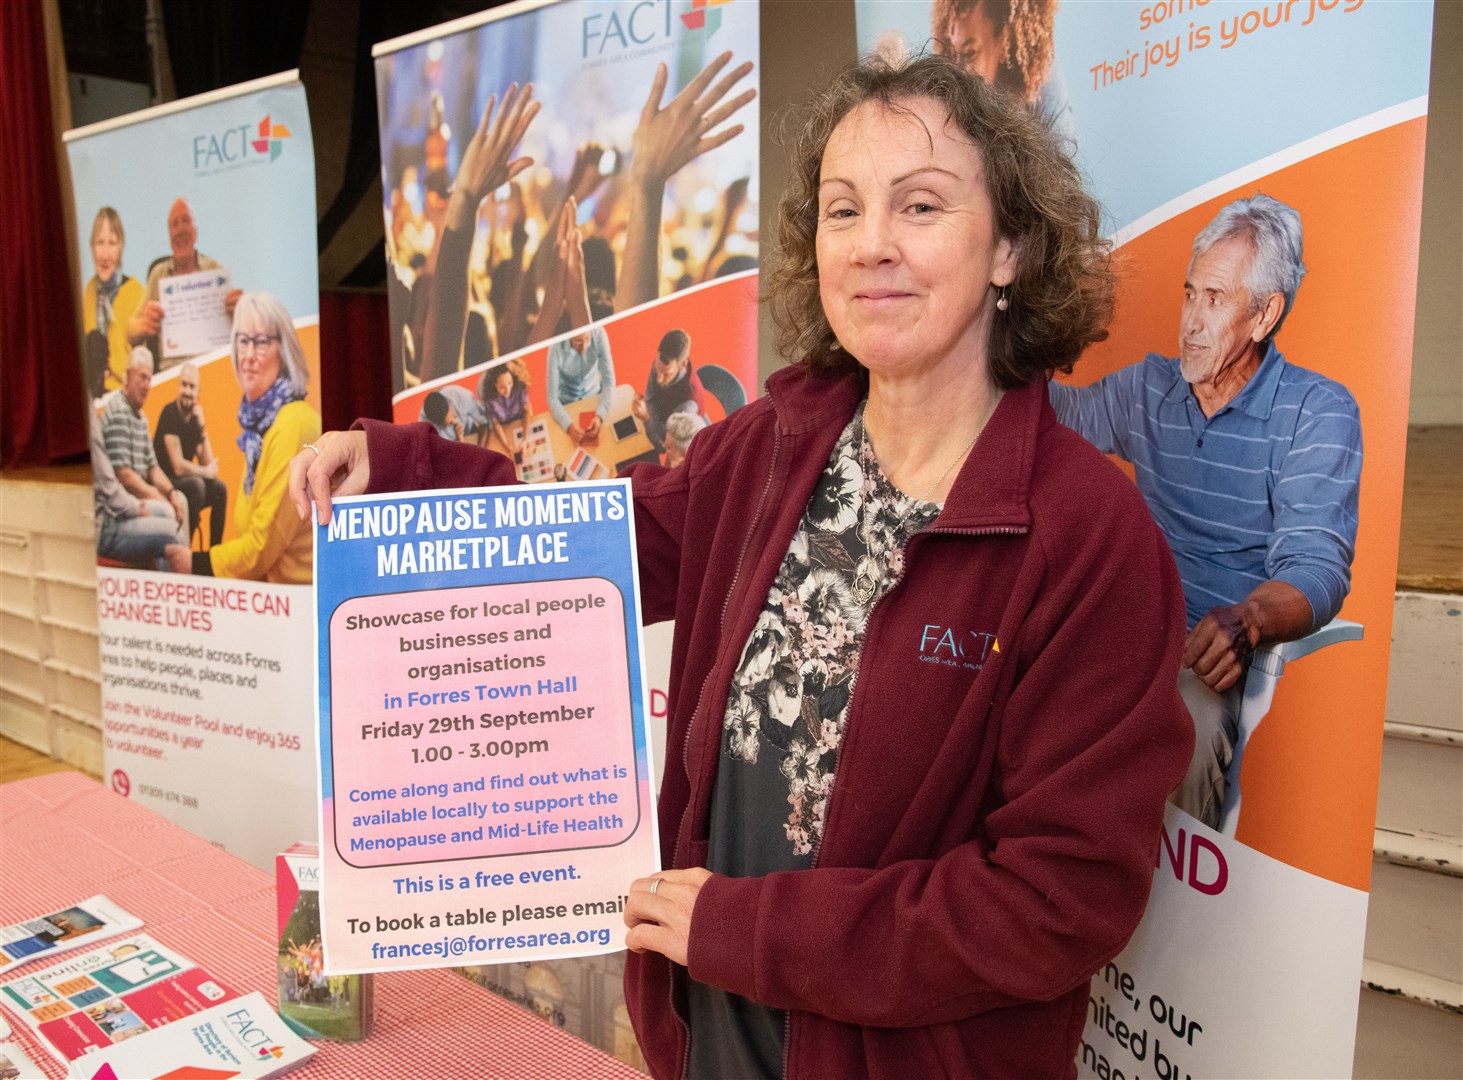 Lead organiser of the event Frances Jamieson at the event. ..Menopause Moments Marketplace at Forres Town Hall. ..Picture: Daniel Forsyth..